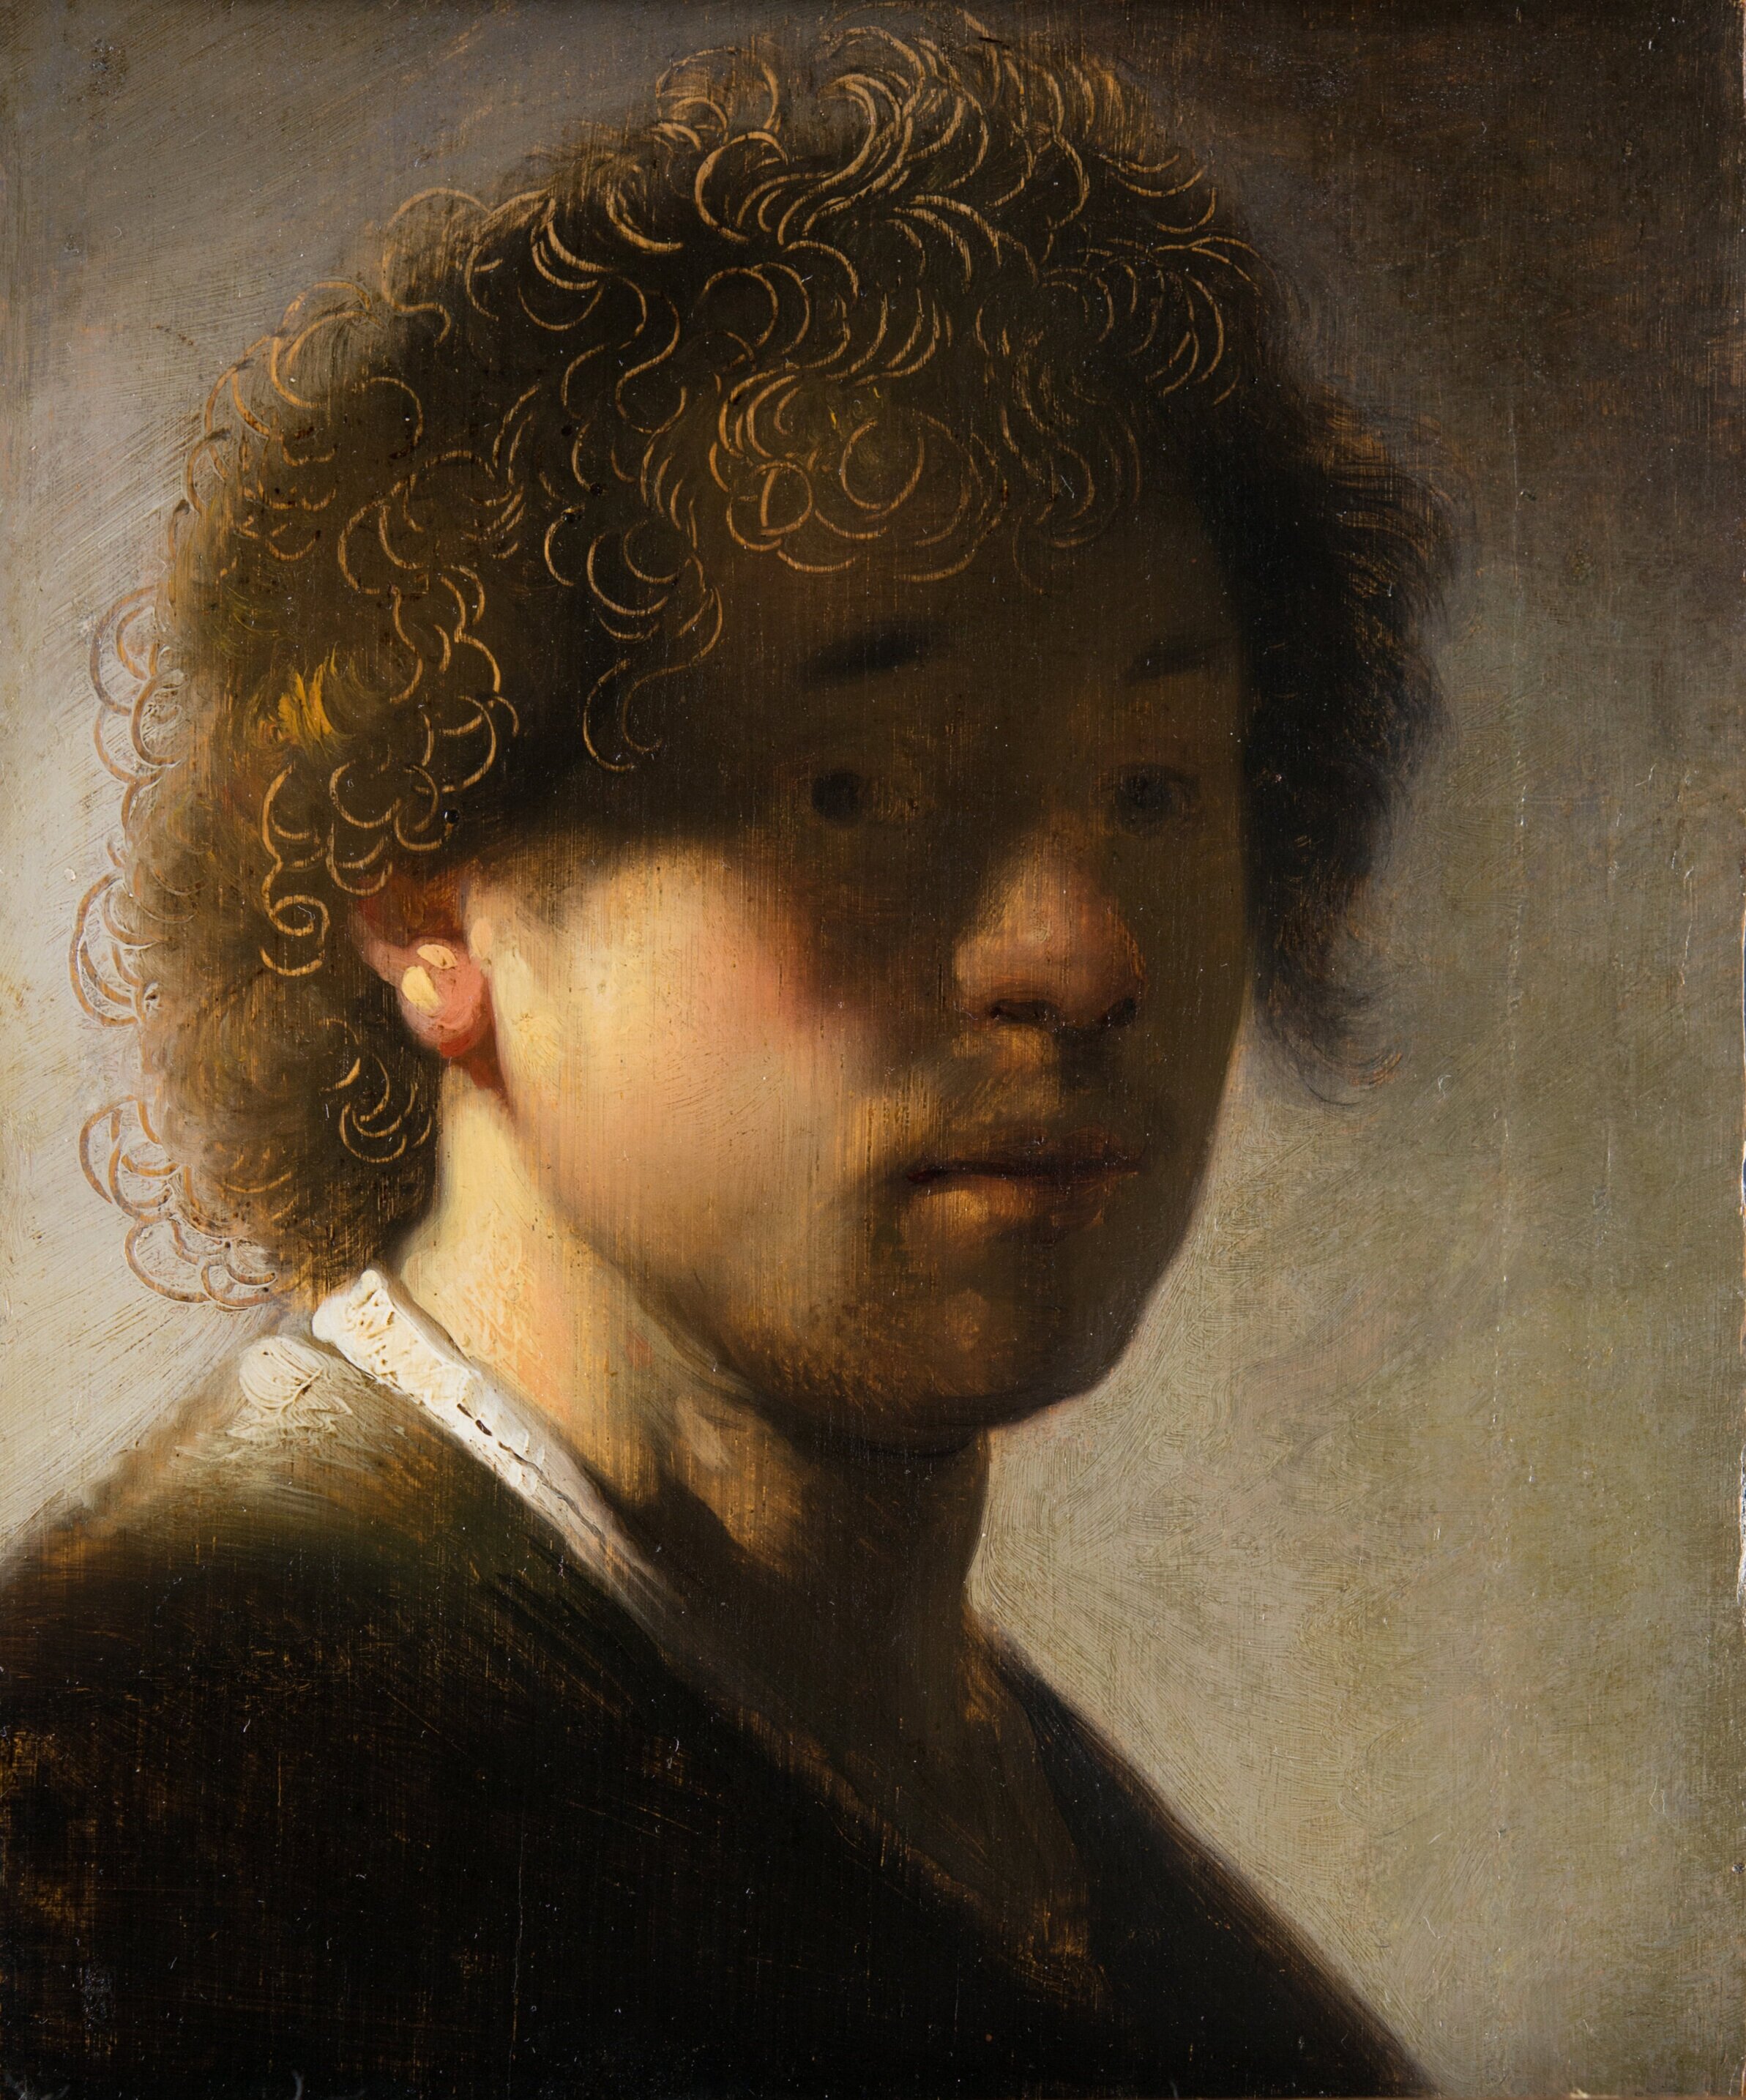 Episode 1 - ‘Self-Portrait Aged 26’, by studio of Rembrandt